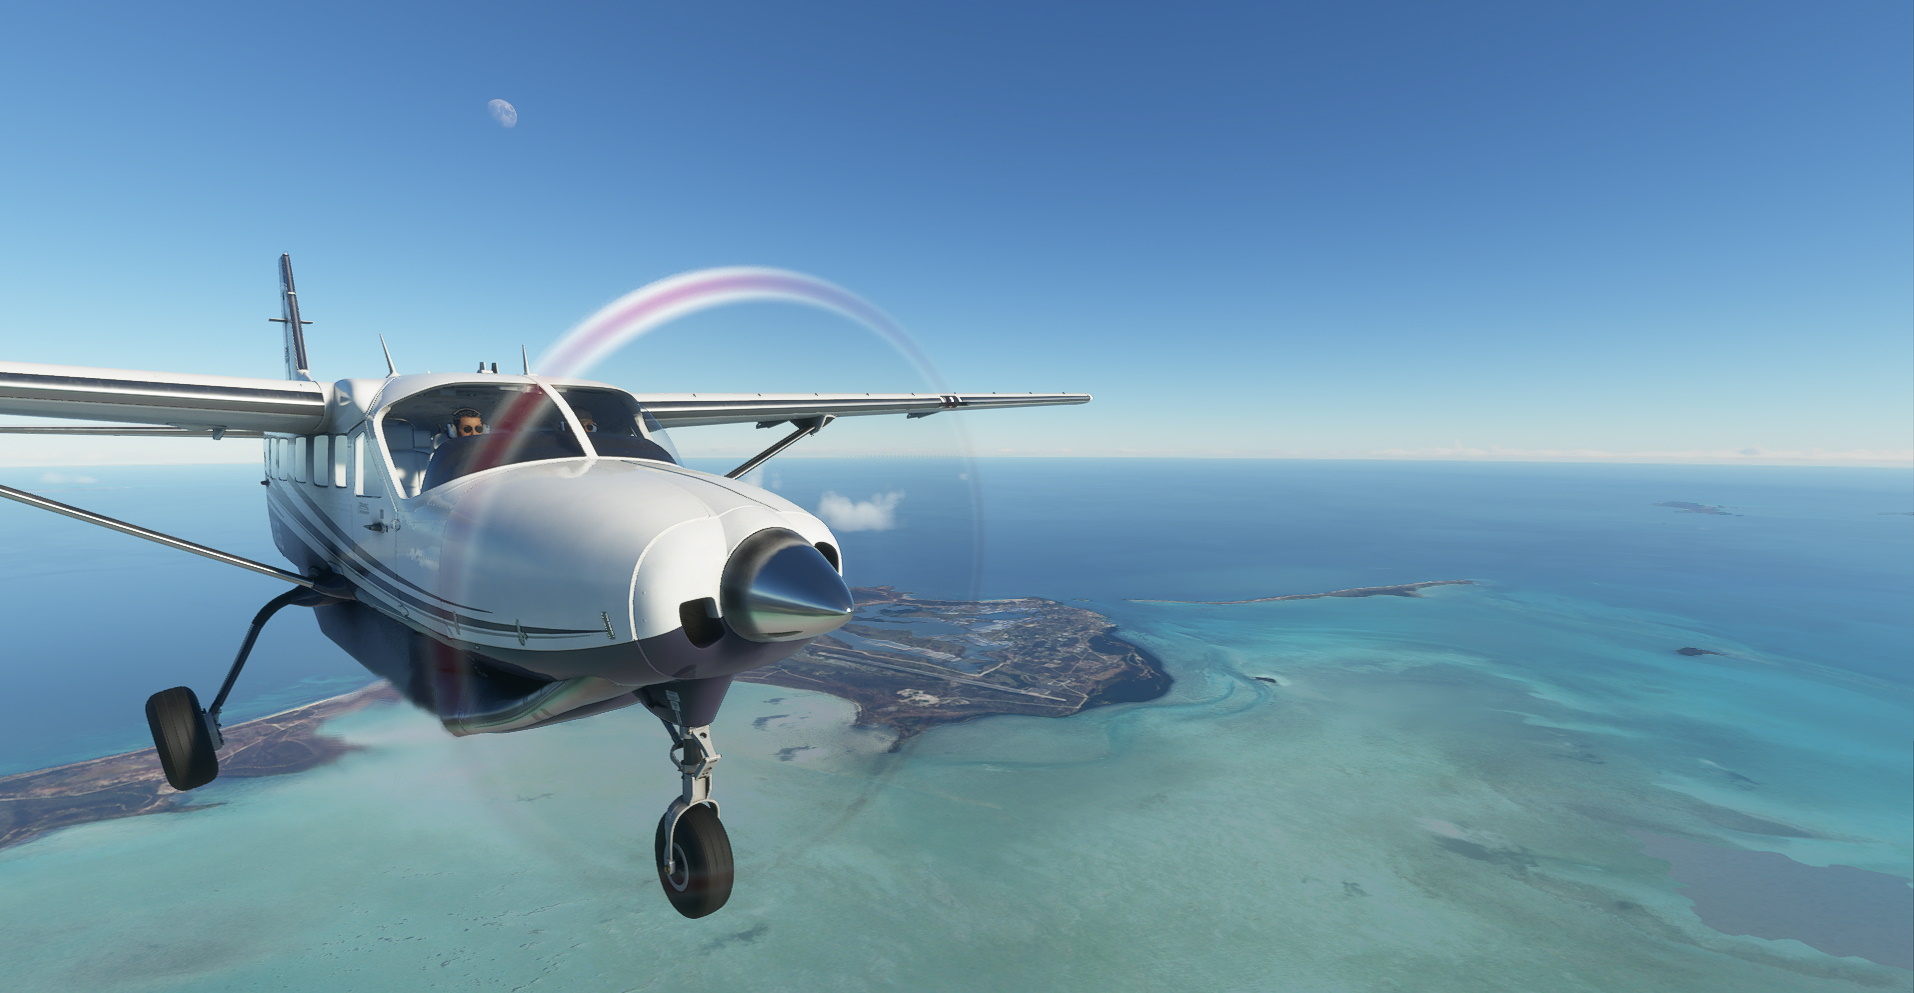 Take it from me, Microsoft Flight Simulator captures the joy of real flying, Games